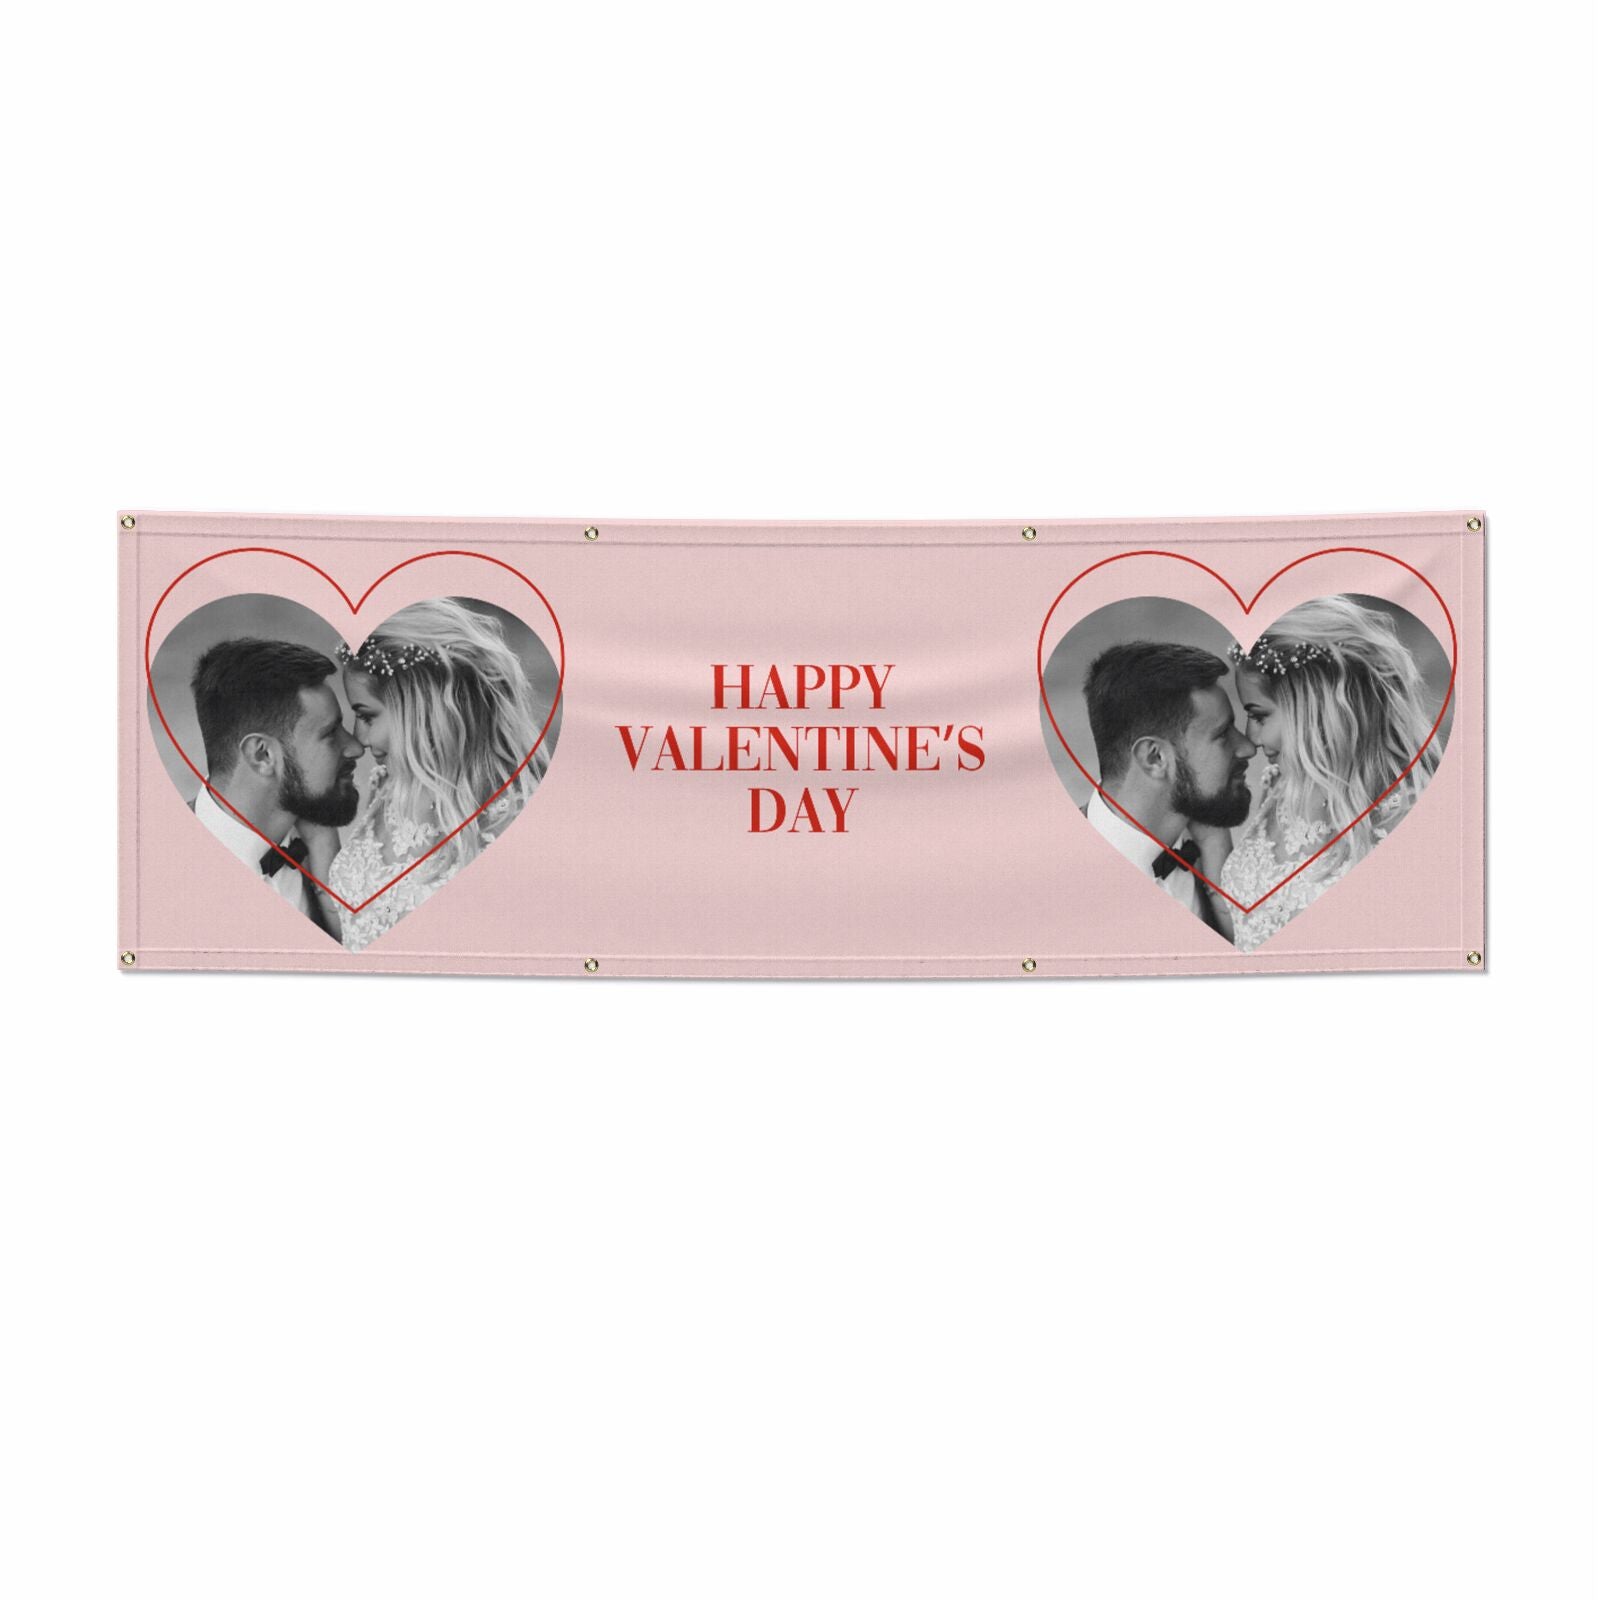 Happy Valentines Day Personalised Photo 6x2 Vinly Banner with Grommets